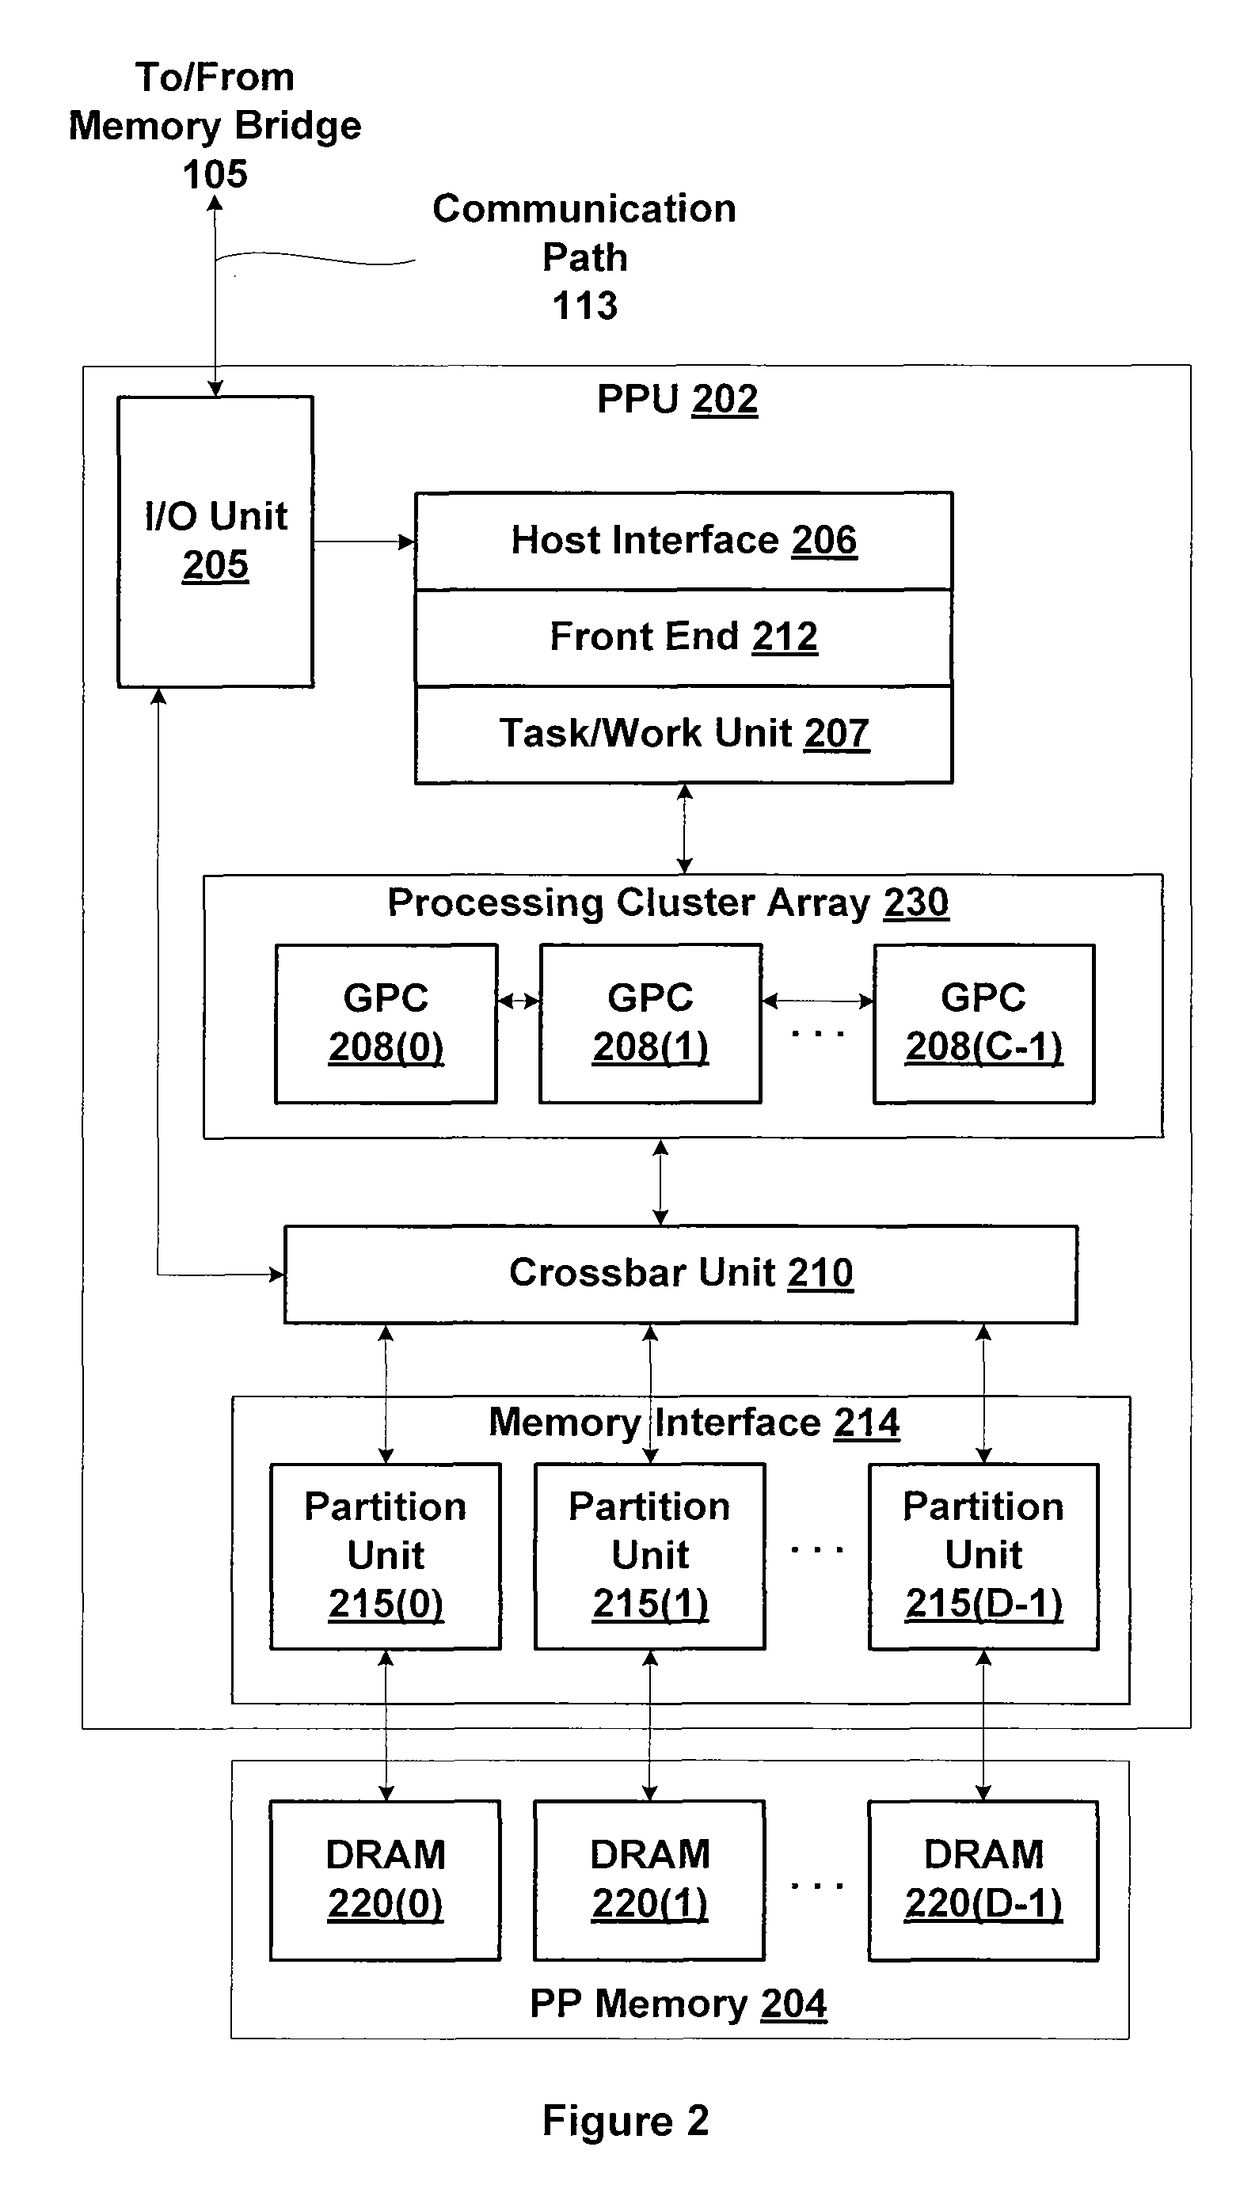 Caching of adaptively sized cache tiles in a unified L2 cache with surface compression